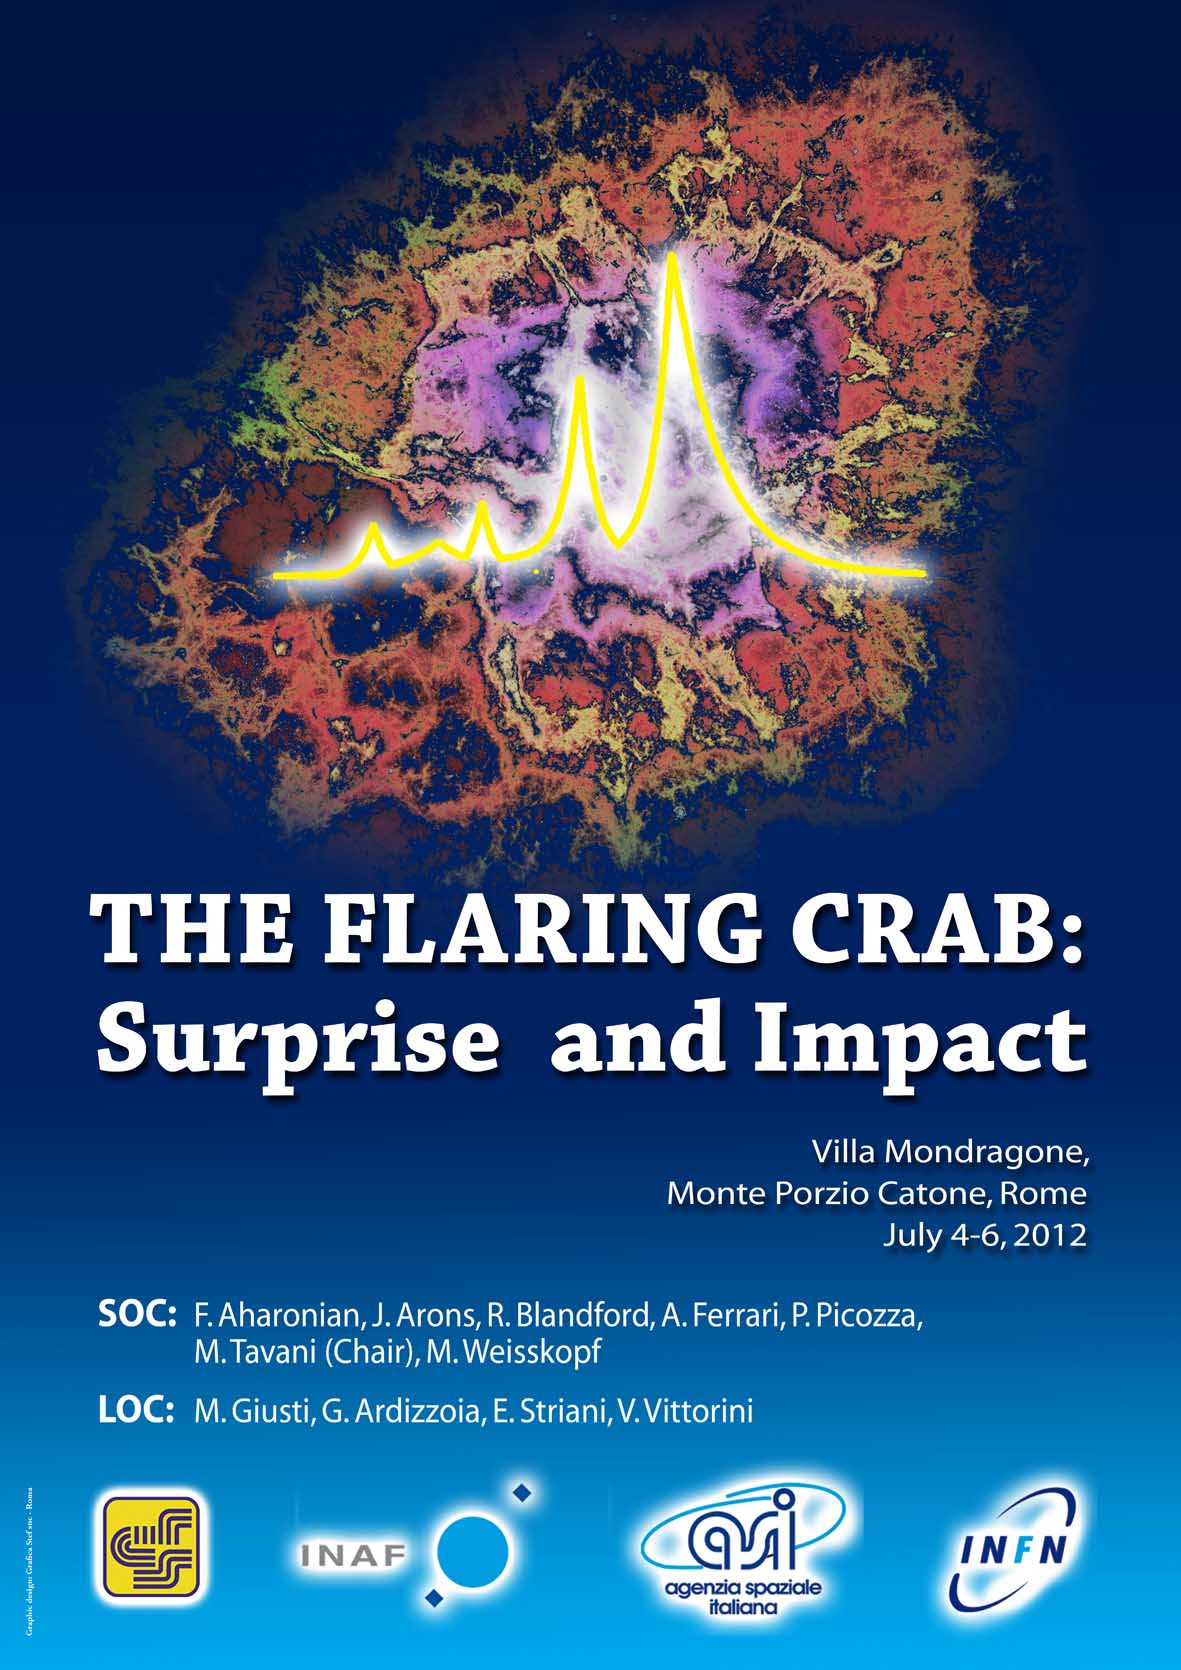 The Flaring Crab Meeting